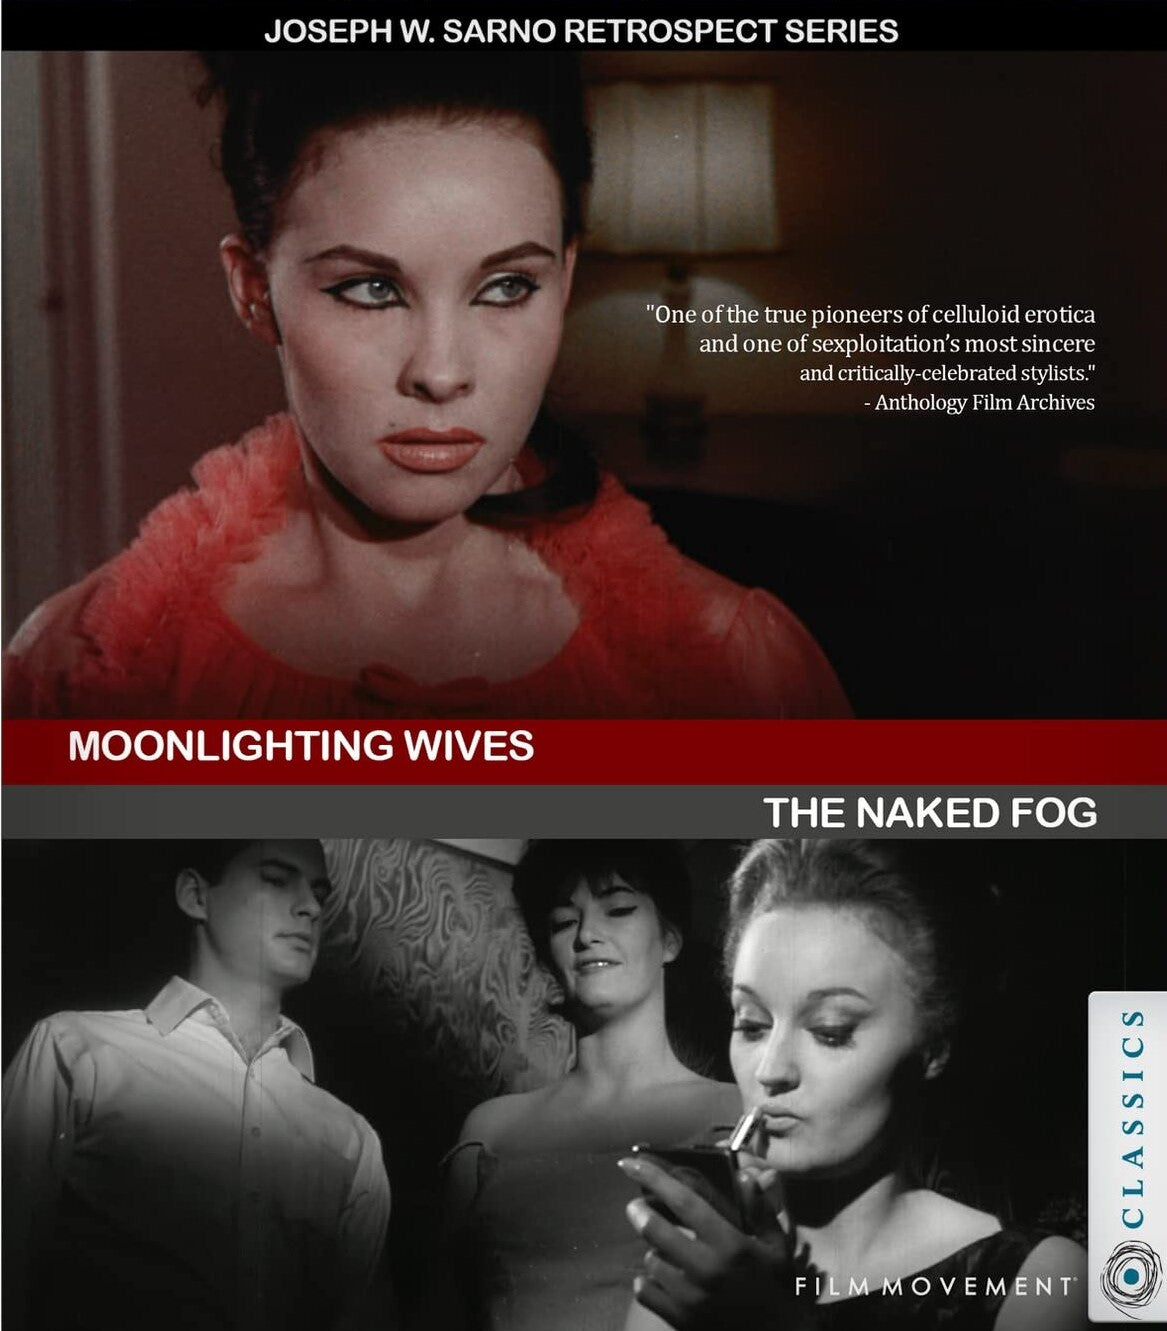 THE NAKED FOG / MOONLIGHTING WIVES BLU-RAY